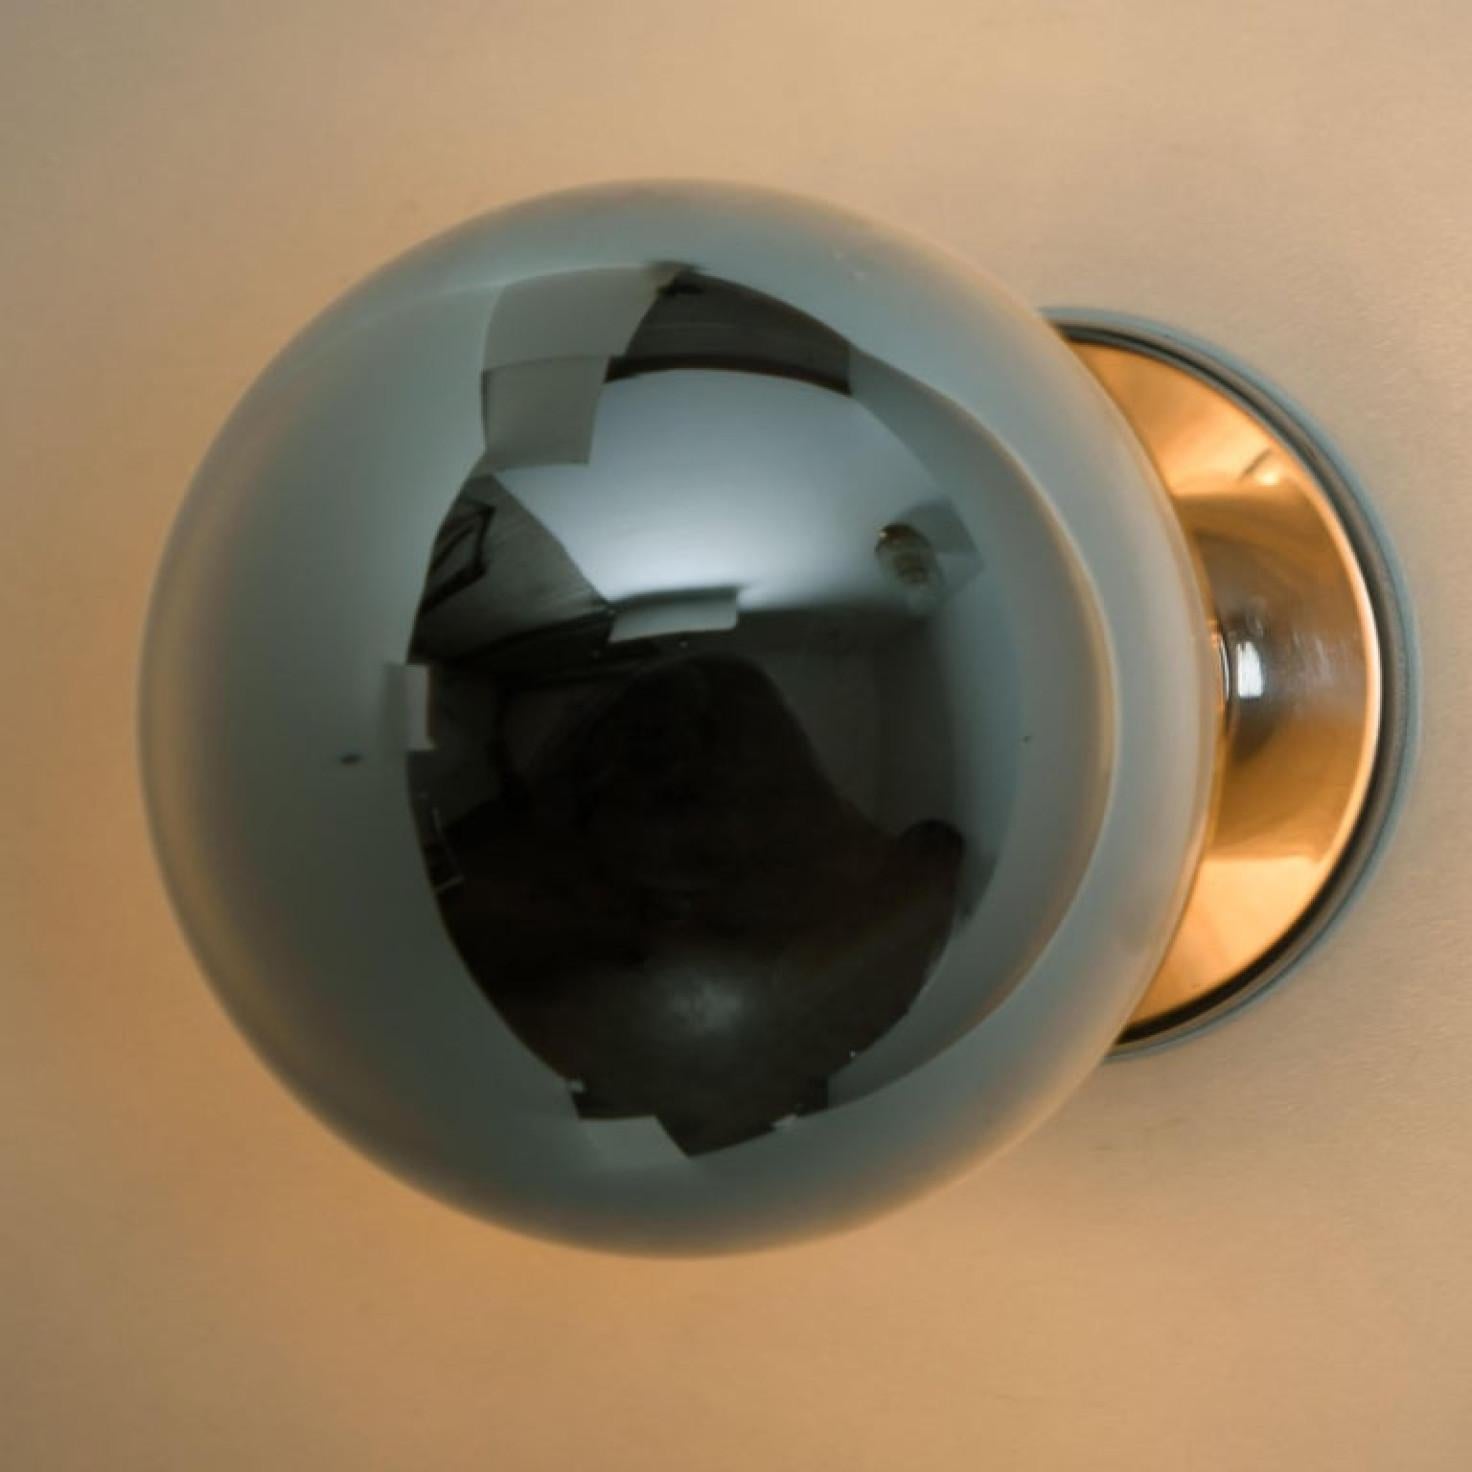 Plated One of the Three Wall Lamps by Motoko Ishii for Staff, 1970s For Sale